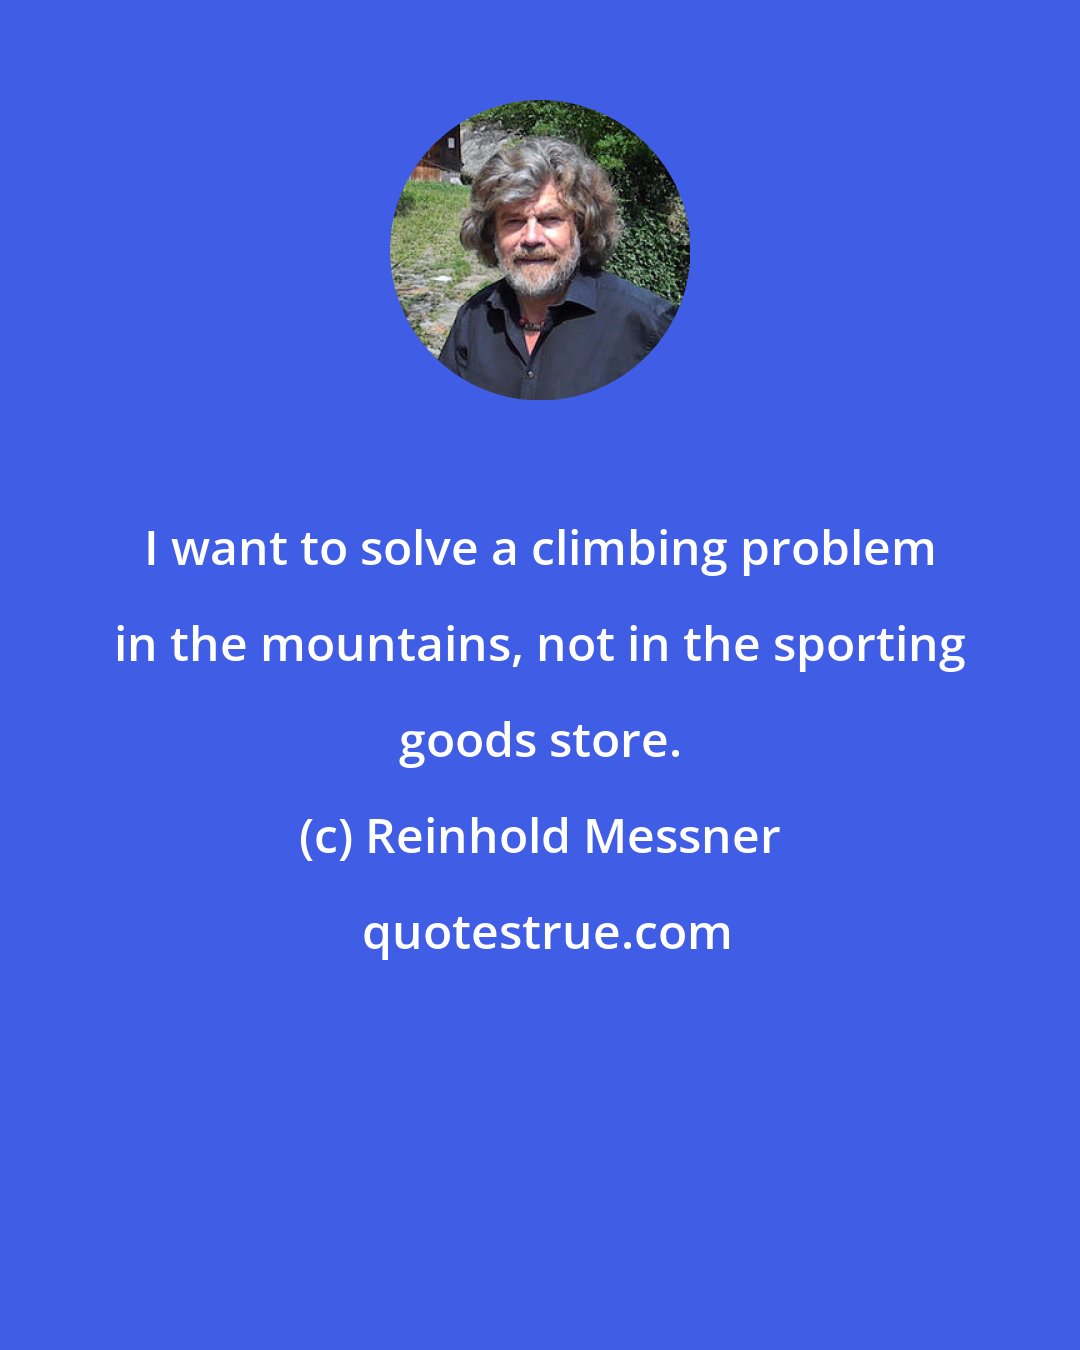 Reinhold Messner: I want to solve a climbing problem in the mountains, not in the sporting goods store.